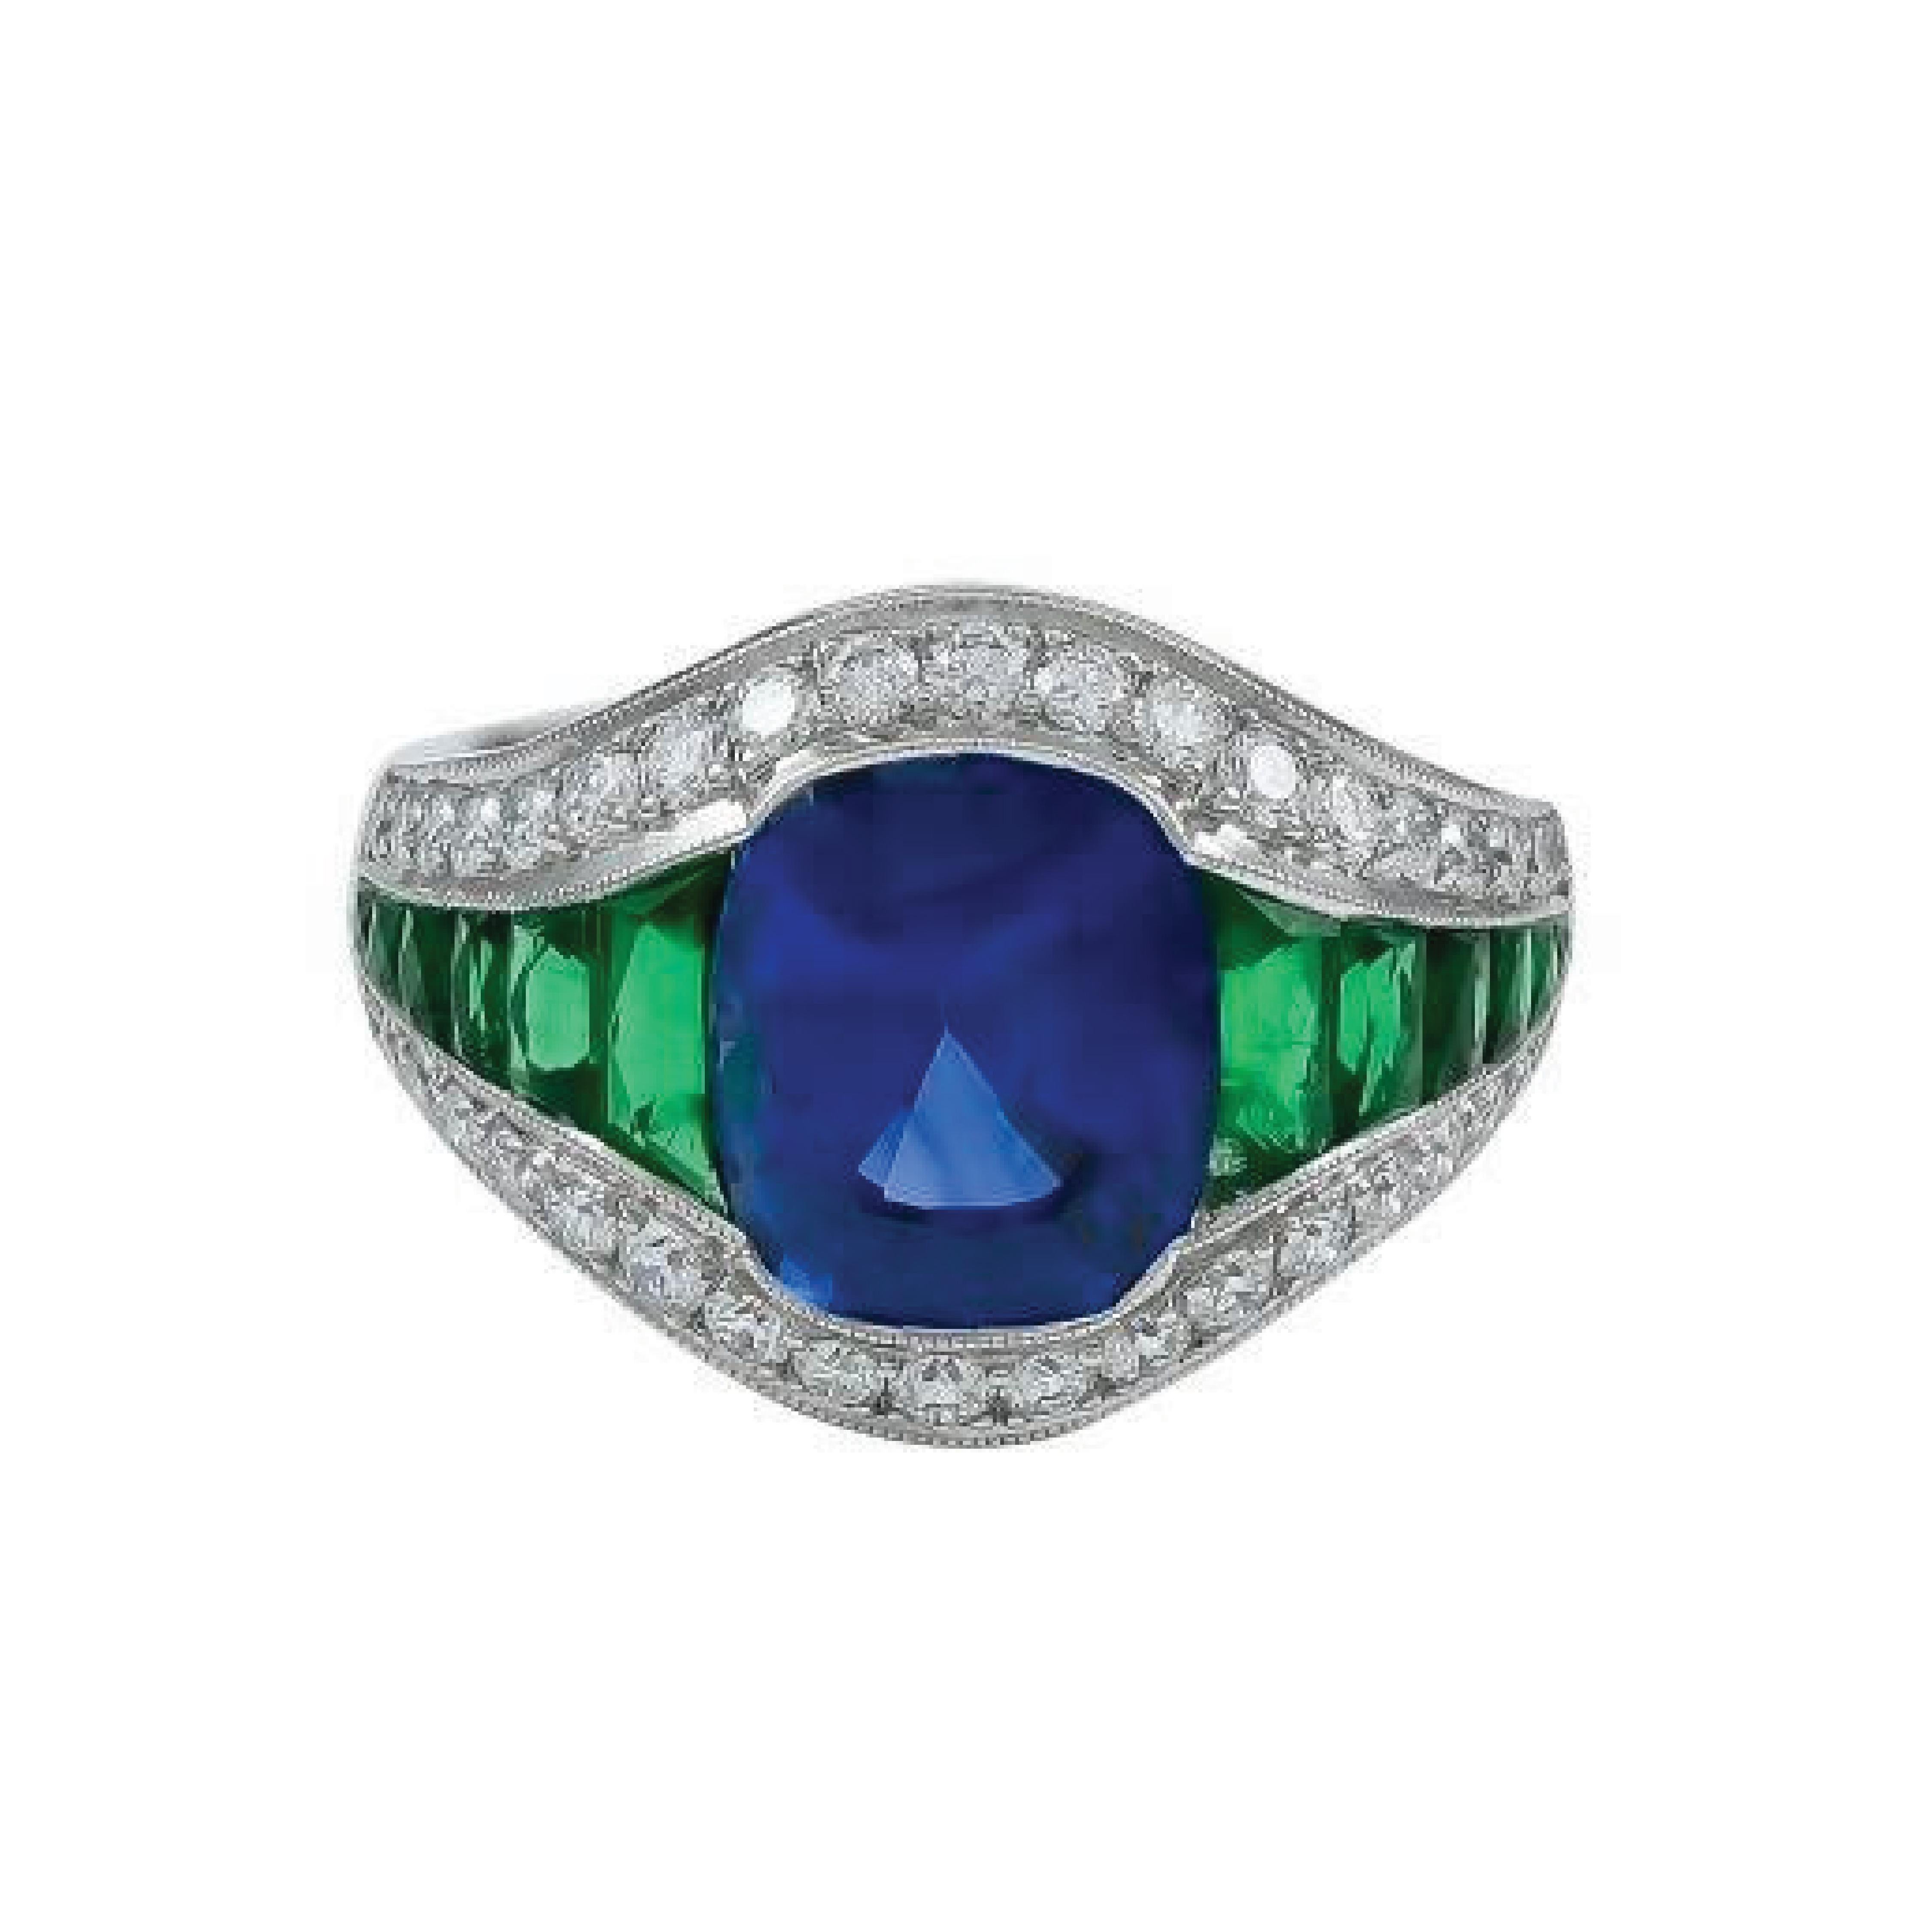 Cushion Cut Sophia D. GIA Certified Platinum Ring with Emerald, Diamond, and Sapphire Center For Sale